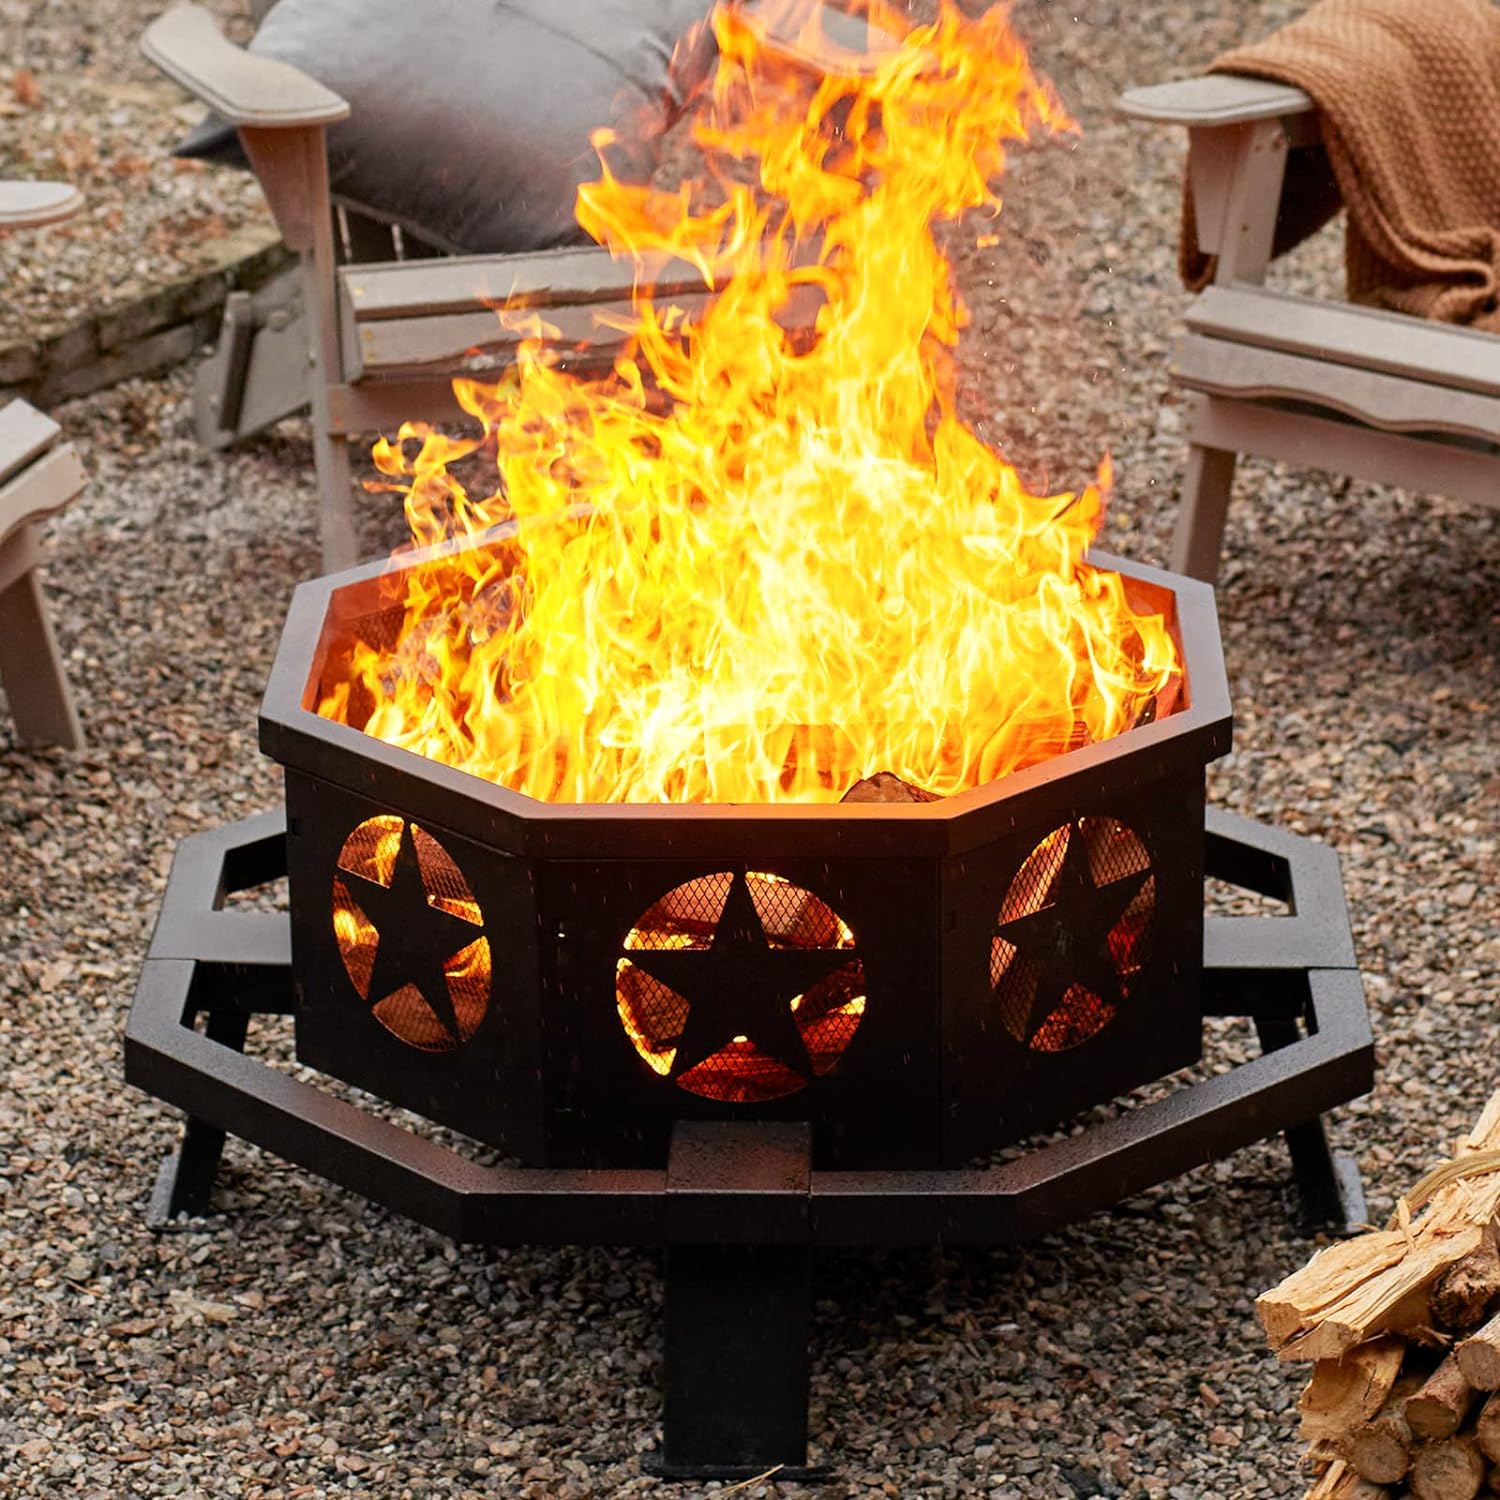 Fissfire 35 inch Fire Pit Review